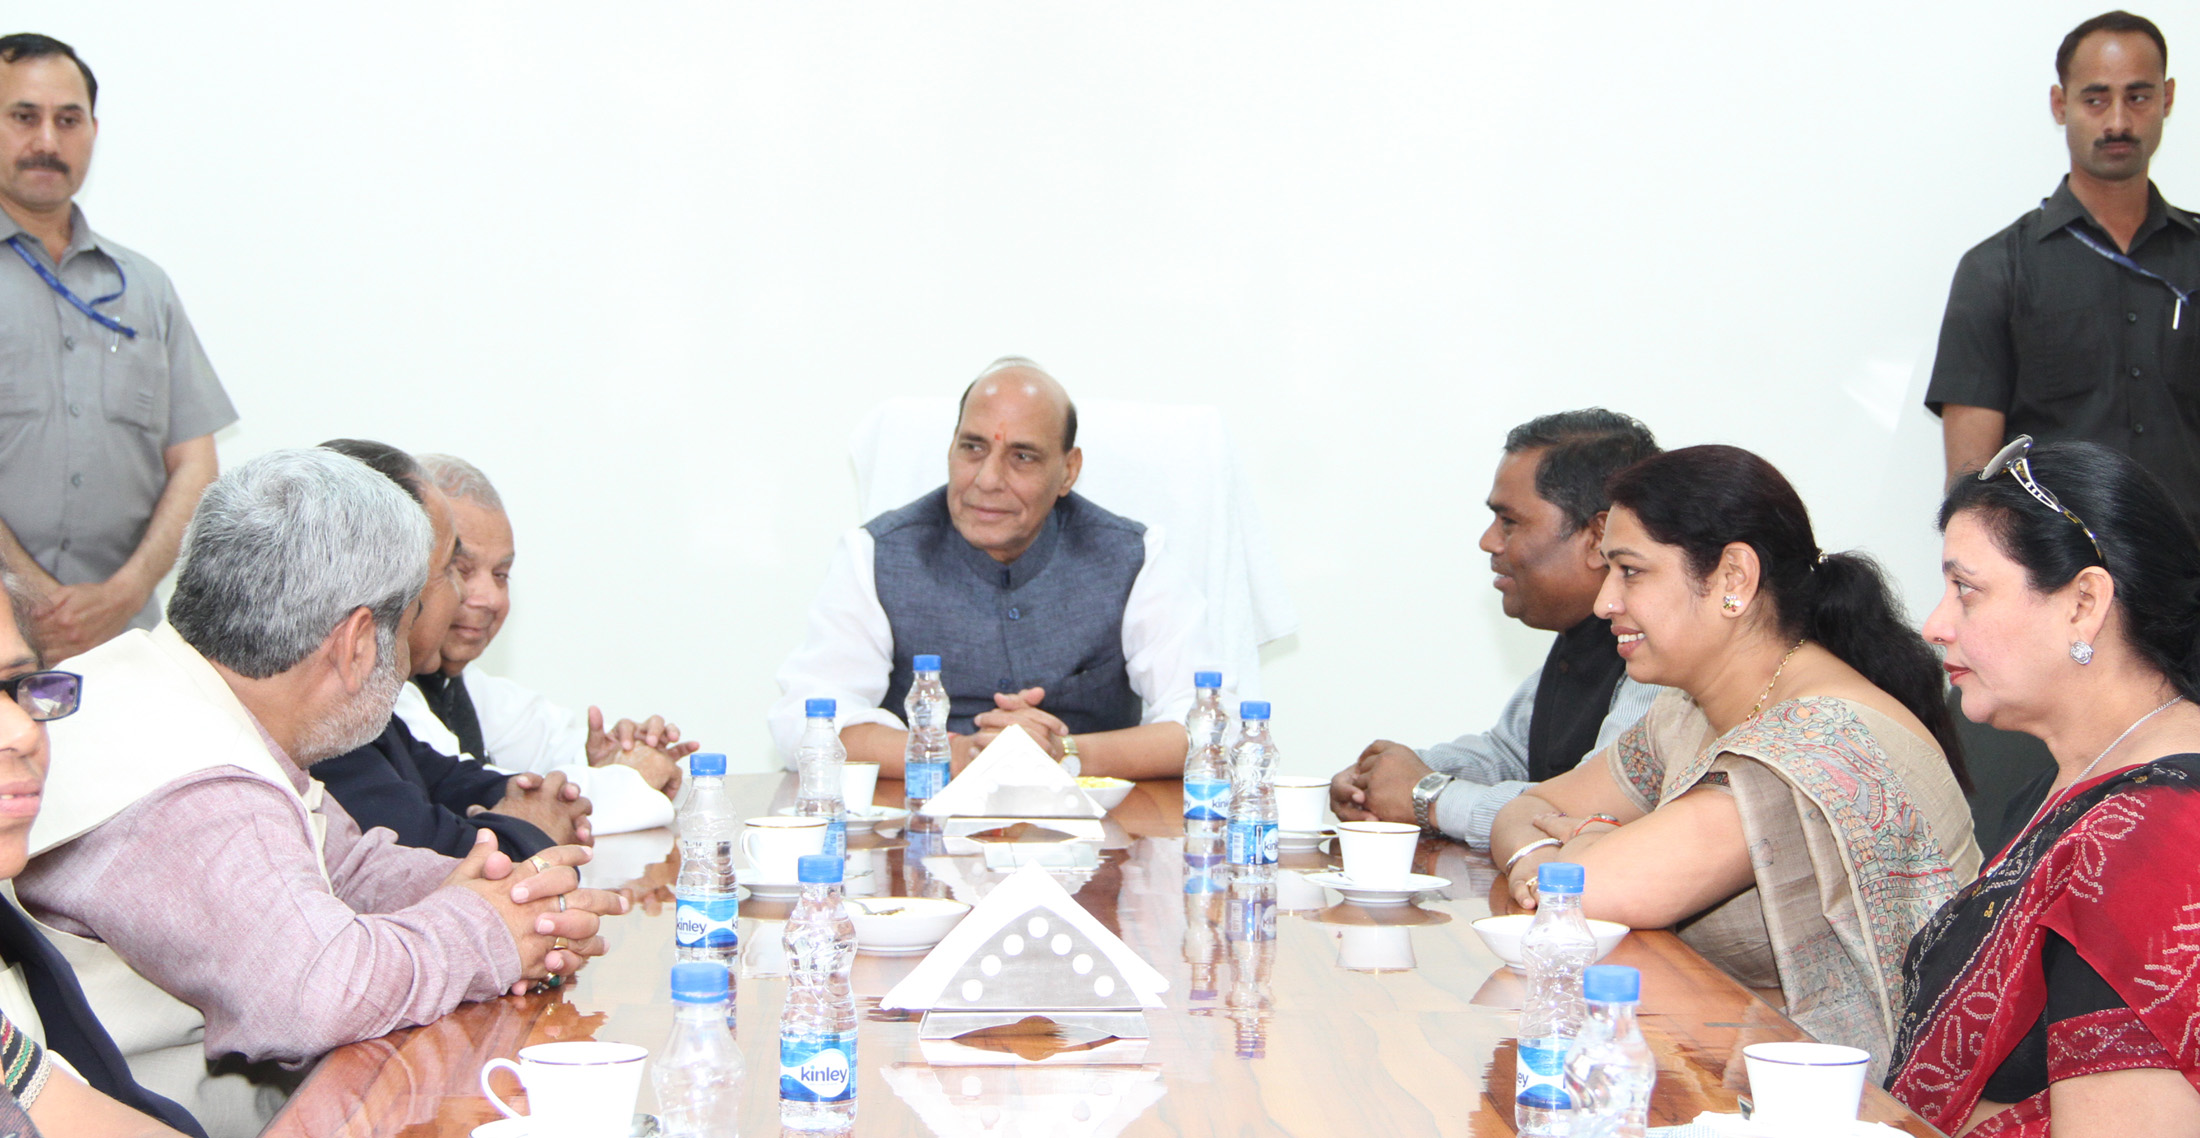 A delegation of political leaders from Nepal under the banner 'Nepal India friendly relation' calling on the Union Home Minister, Shri Rajnath Singh, in New Delhi on March 13, 2016.